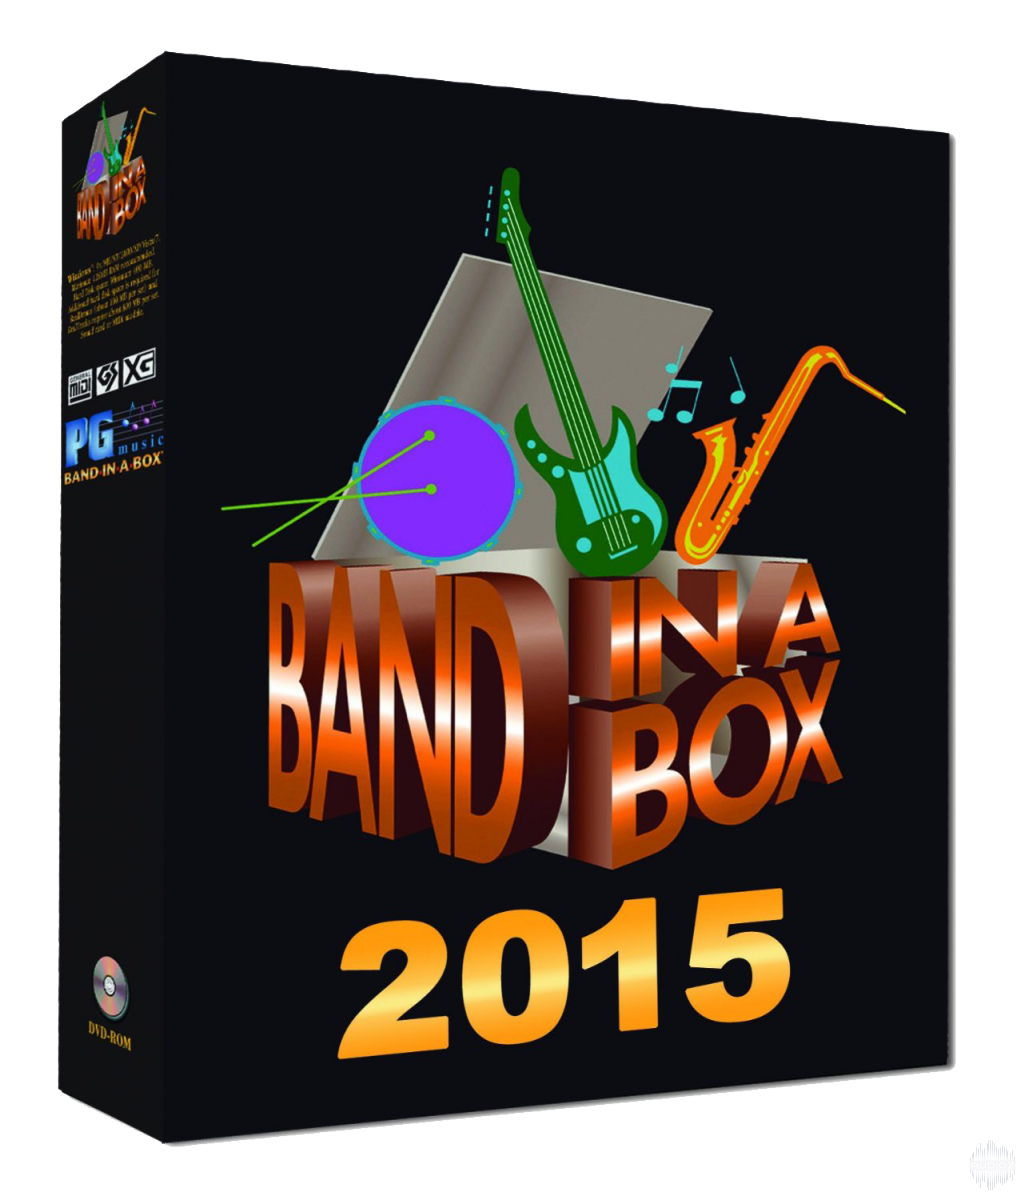 download band in a box songs